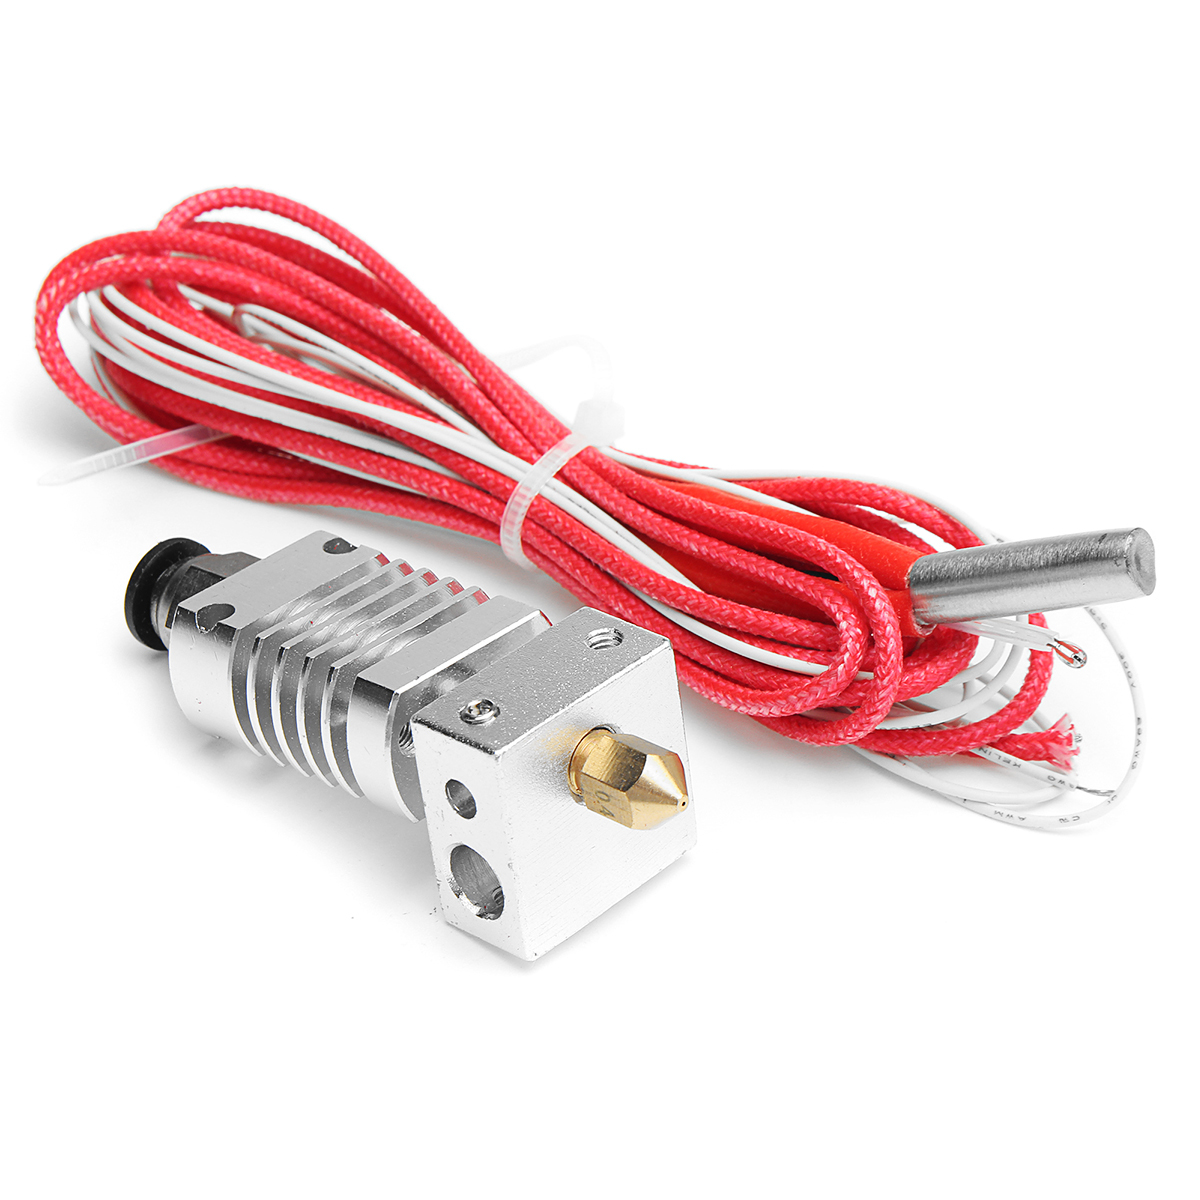 V6 1.75mm All Metal J-Head Hotend Remote Extruder Kit with Heating tube for CR10 3D Printer 1